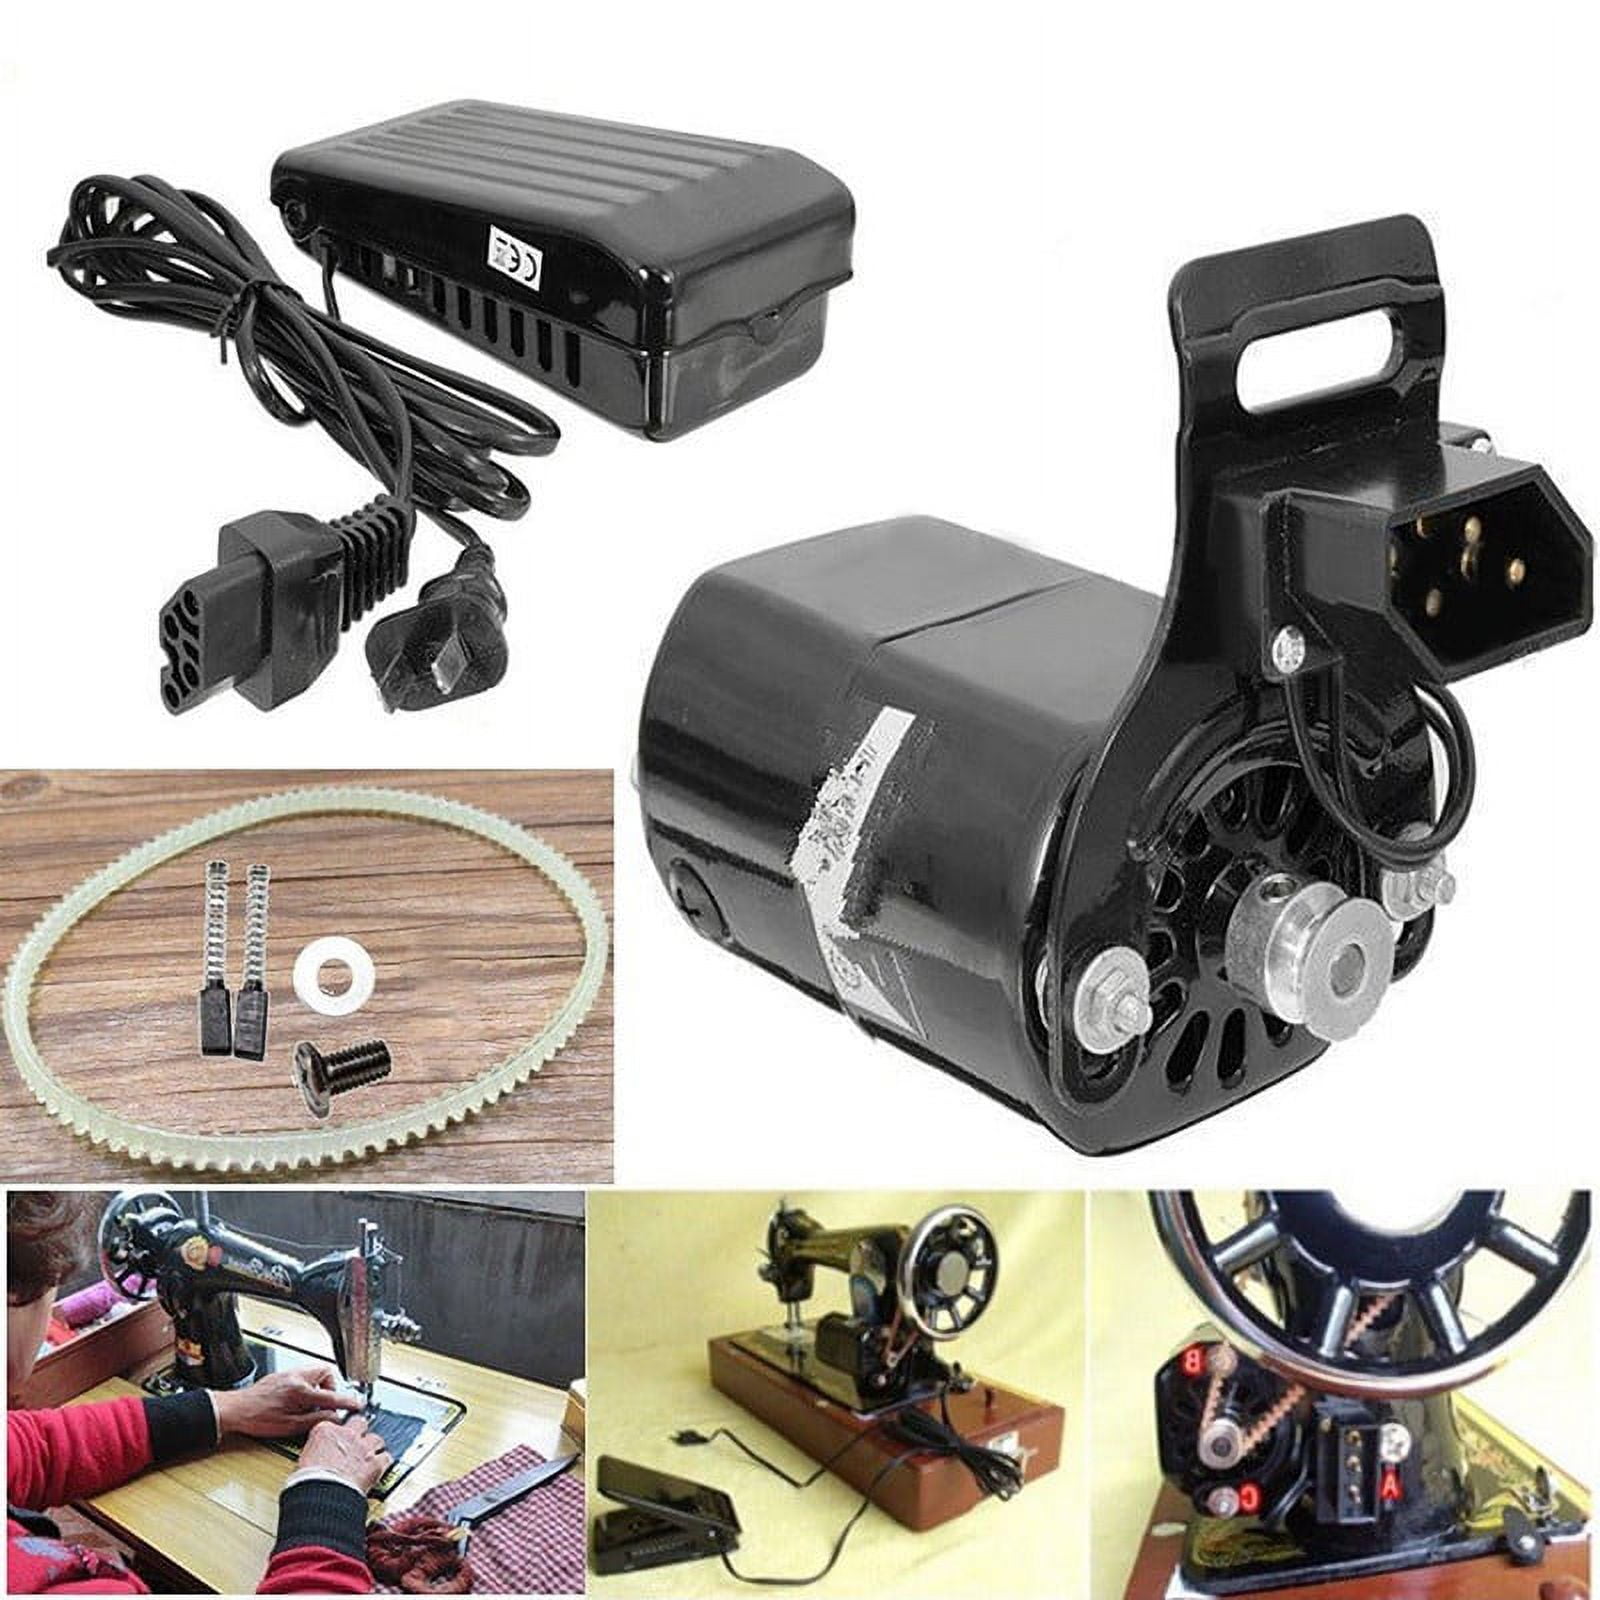 HimaPro Home Sewing Machine Motor(Black) with Foot Pedal, Motor Belt, Bracket, Bolts, and Carbon Brush